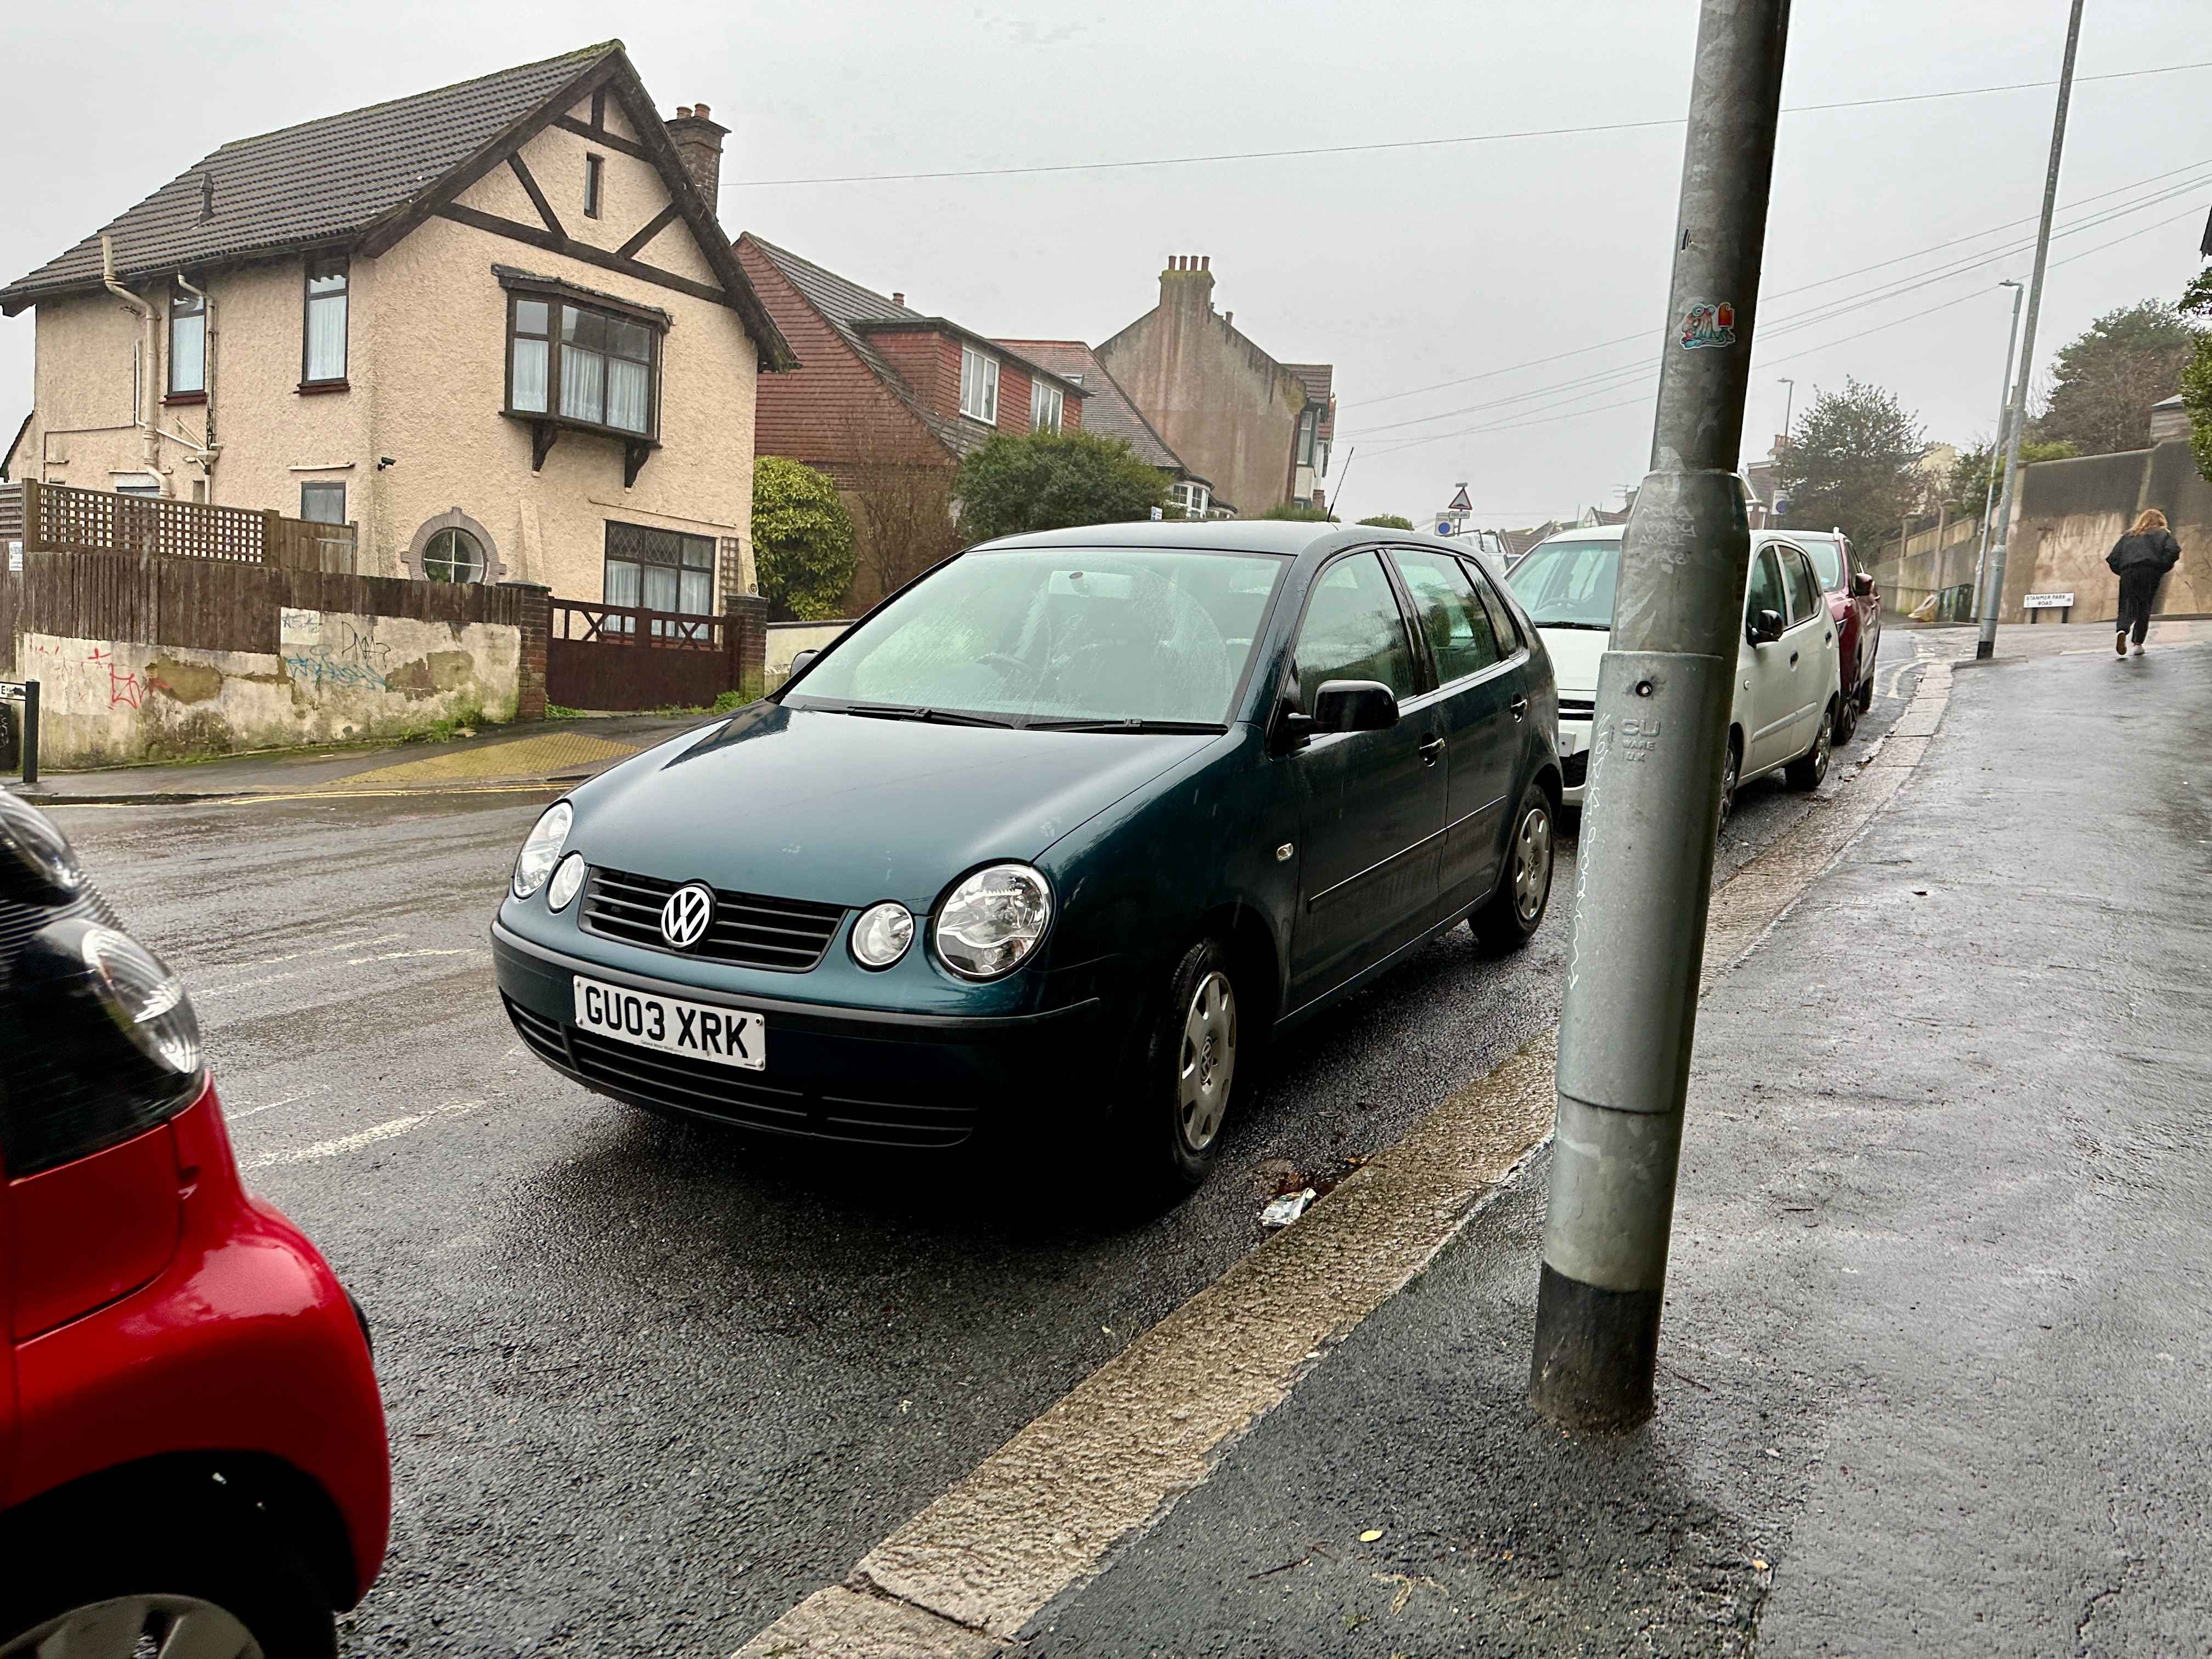 Photograph of GU03 XRK - a Green Volkswagen Polo parked in Hollingdean by a non-resident. The fifth of eight photographs supplied by the residents of Hollingdean.